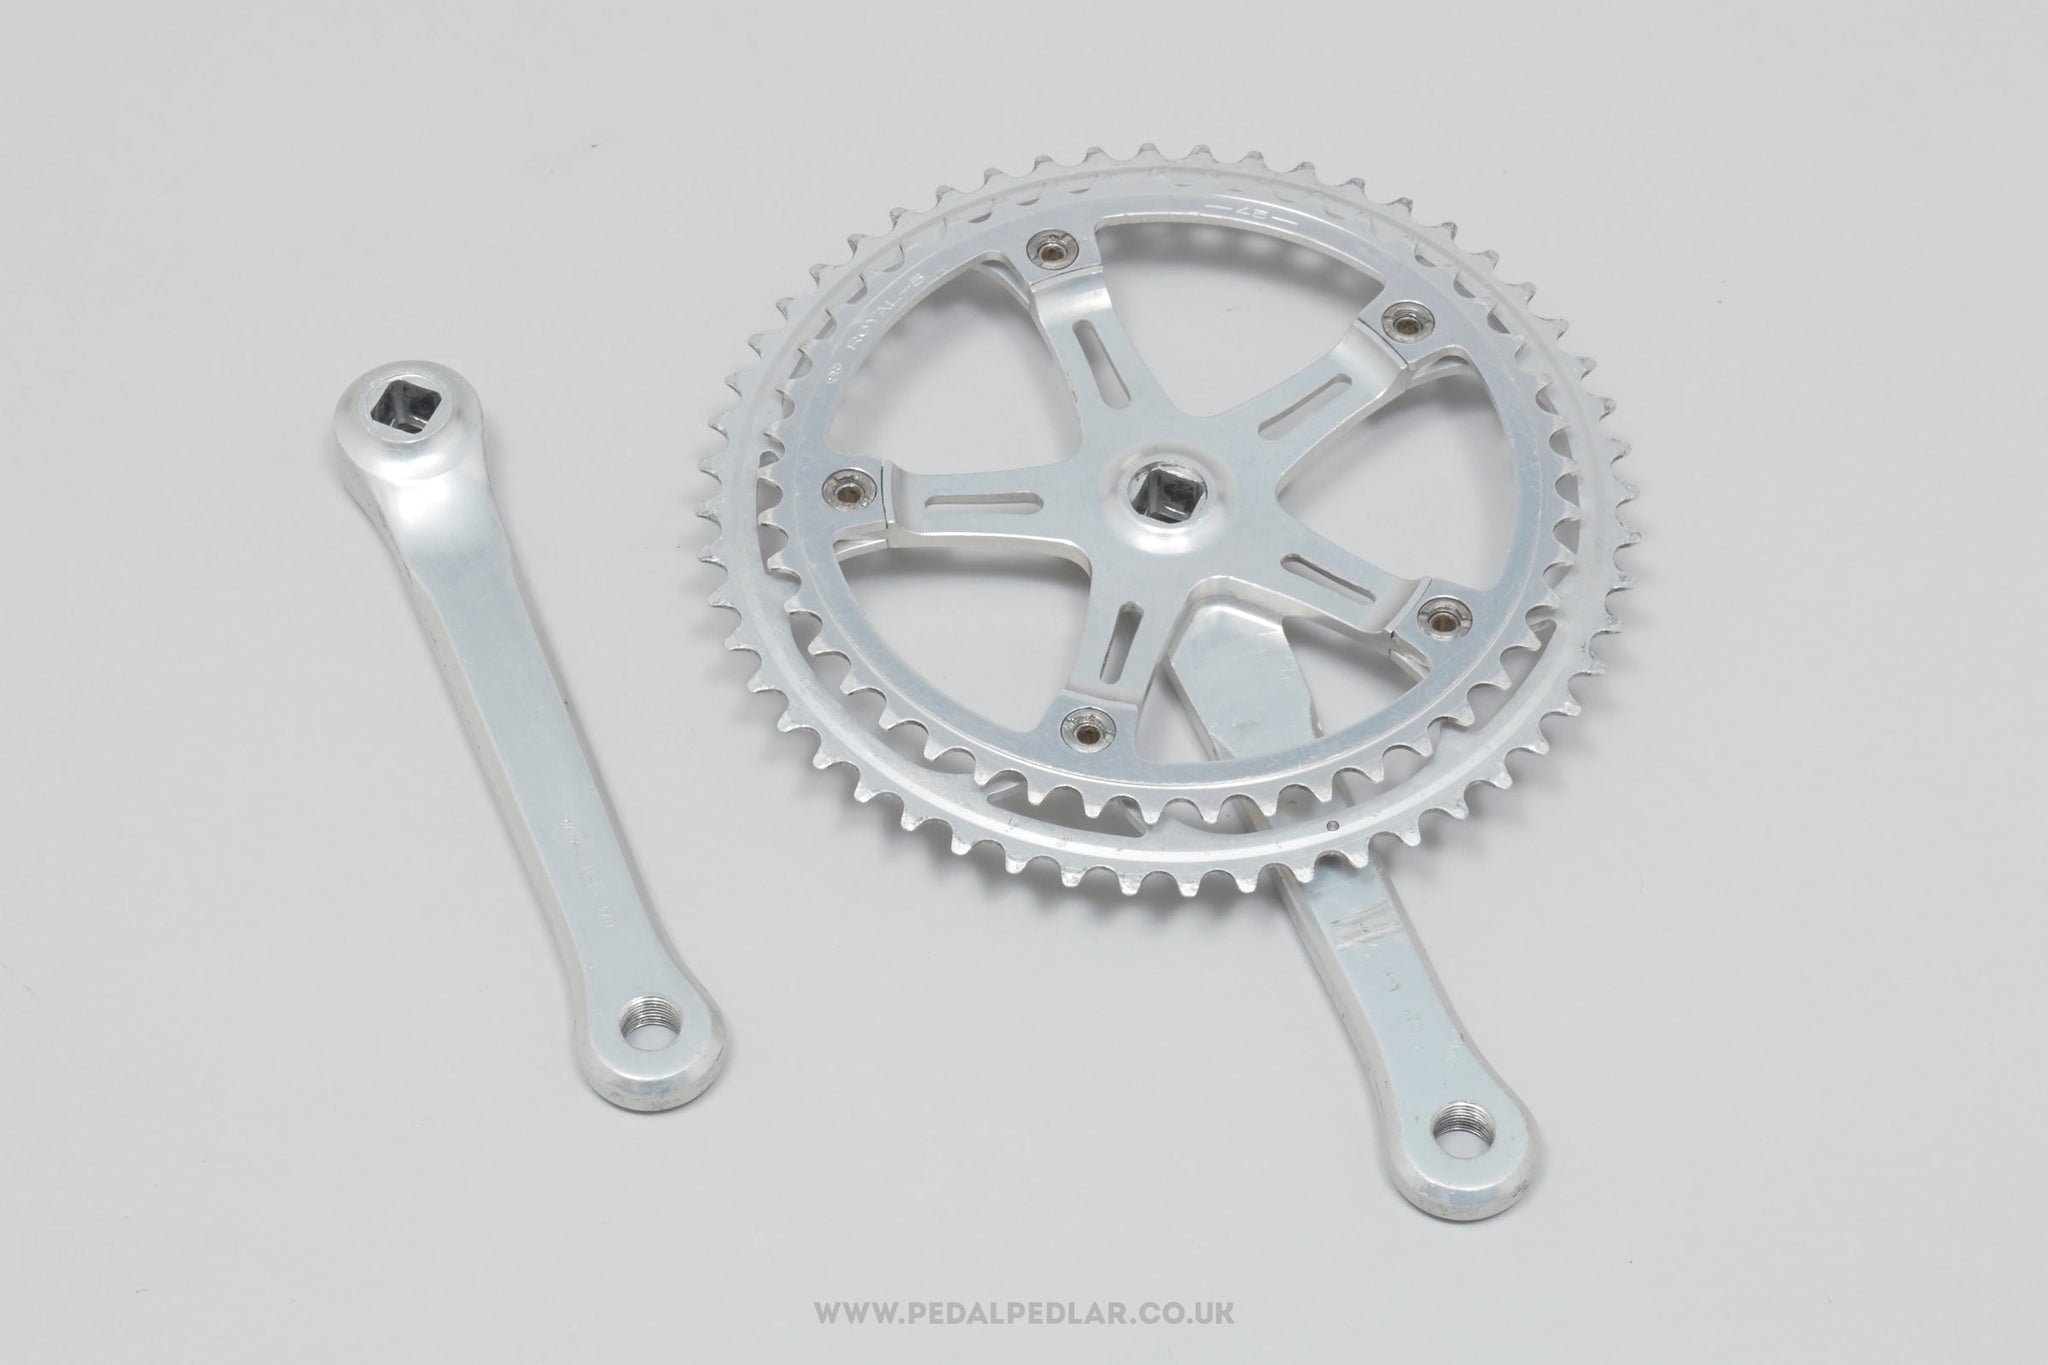 Sugino Super Mighty Competition Vintage Road Crank/Chainset